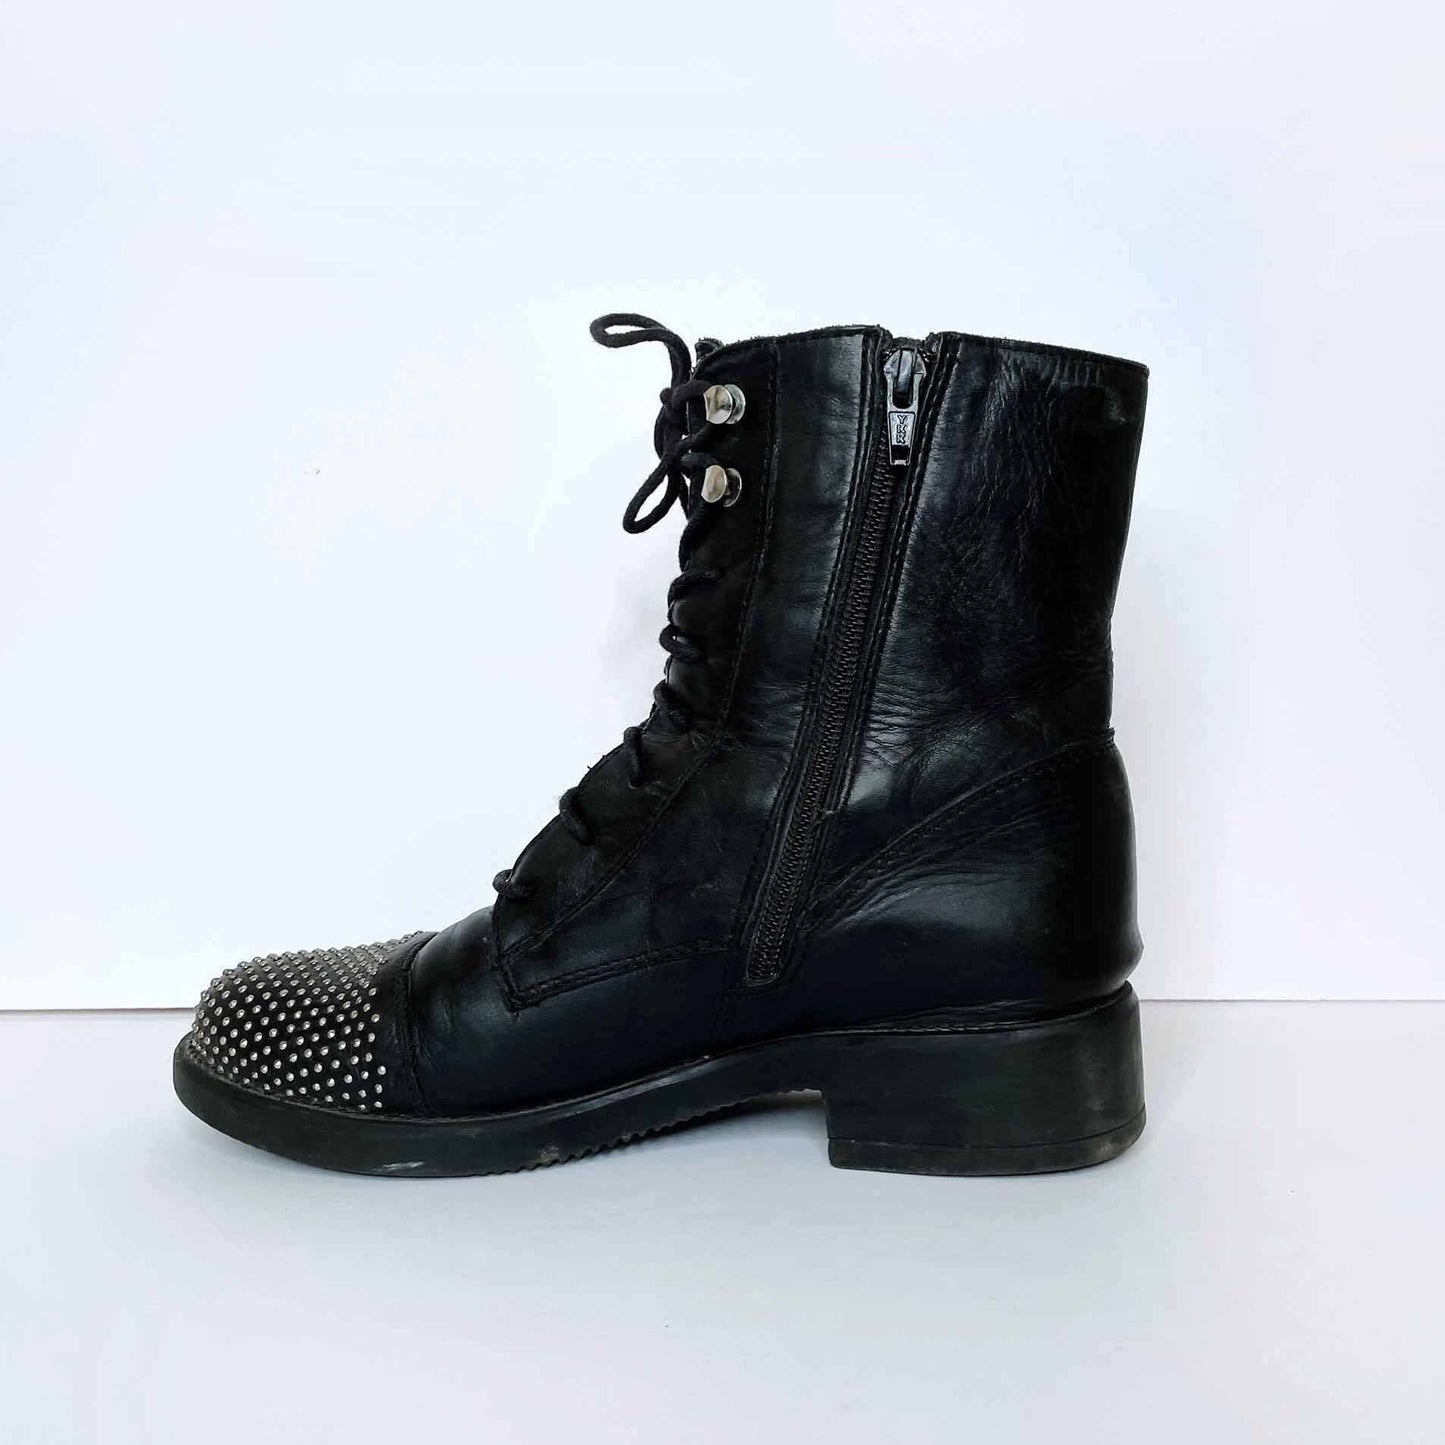 aldo black leather lace-up moto boots with studded toe - size 38